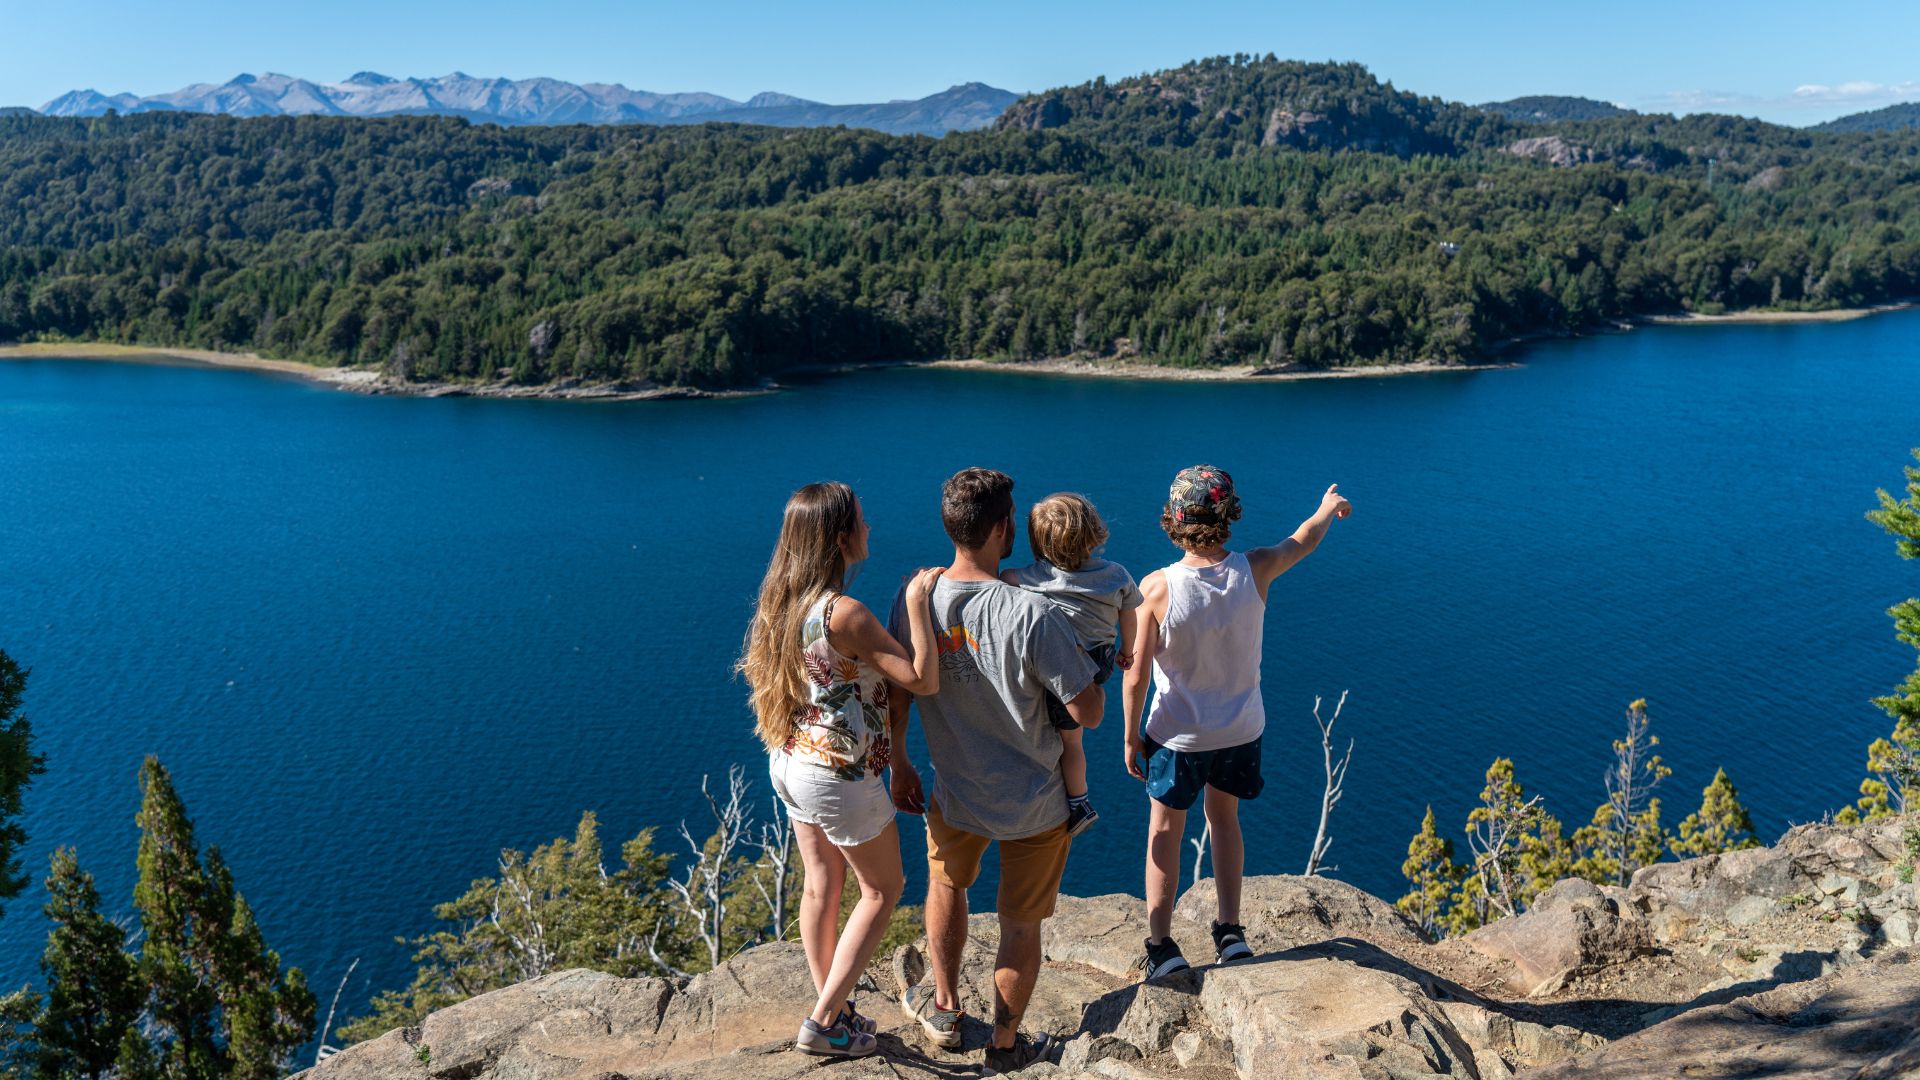 Bariloche reached 1.2 million tourists in one year (source: the nation's Ministry of Tourism and Sports)